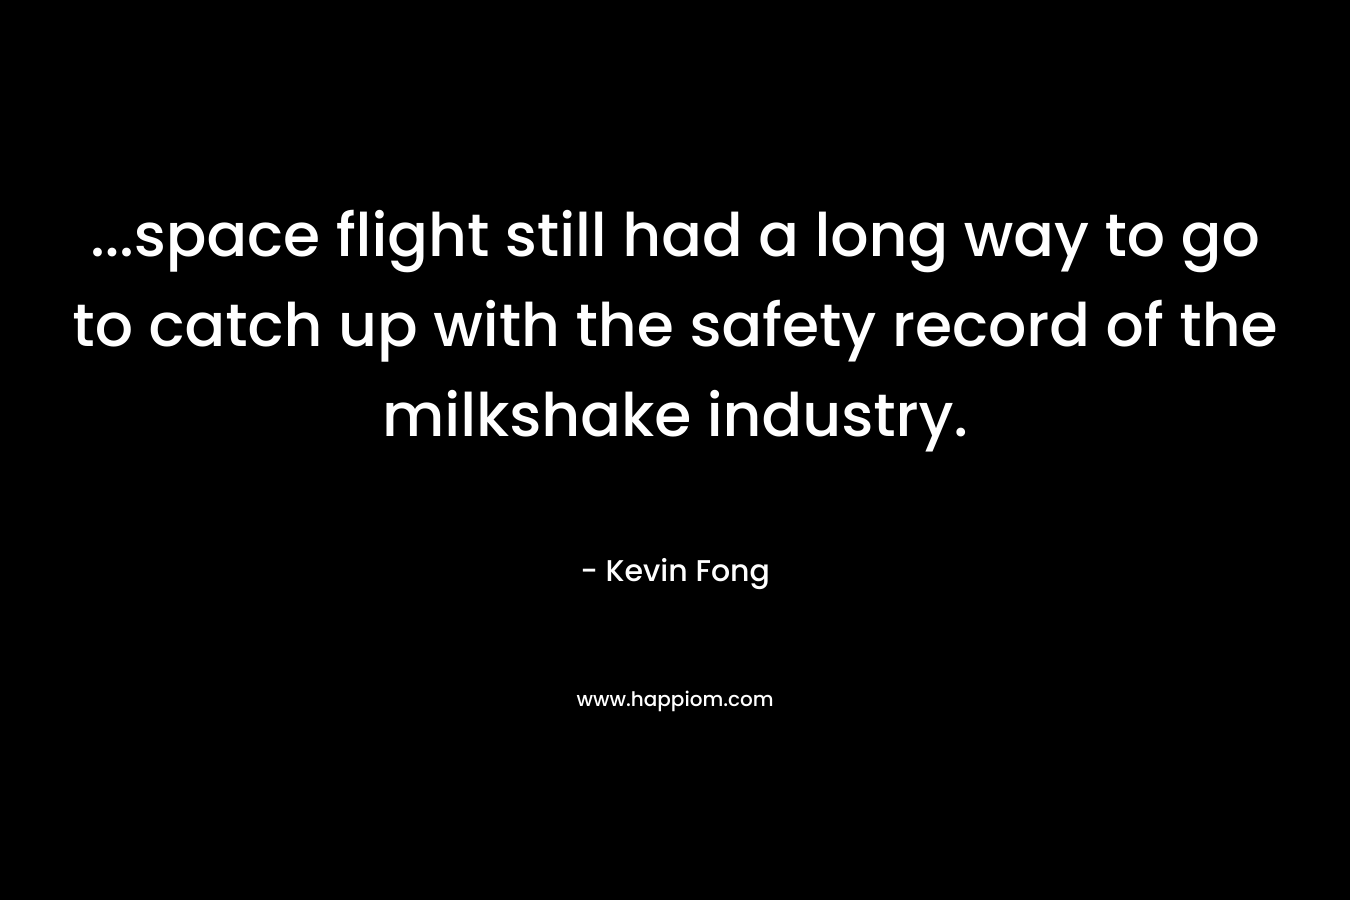 ...space flight still had a long way to go to catch up with the safety record of the milkshake industry.